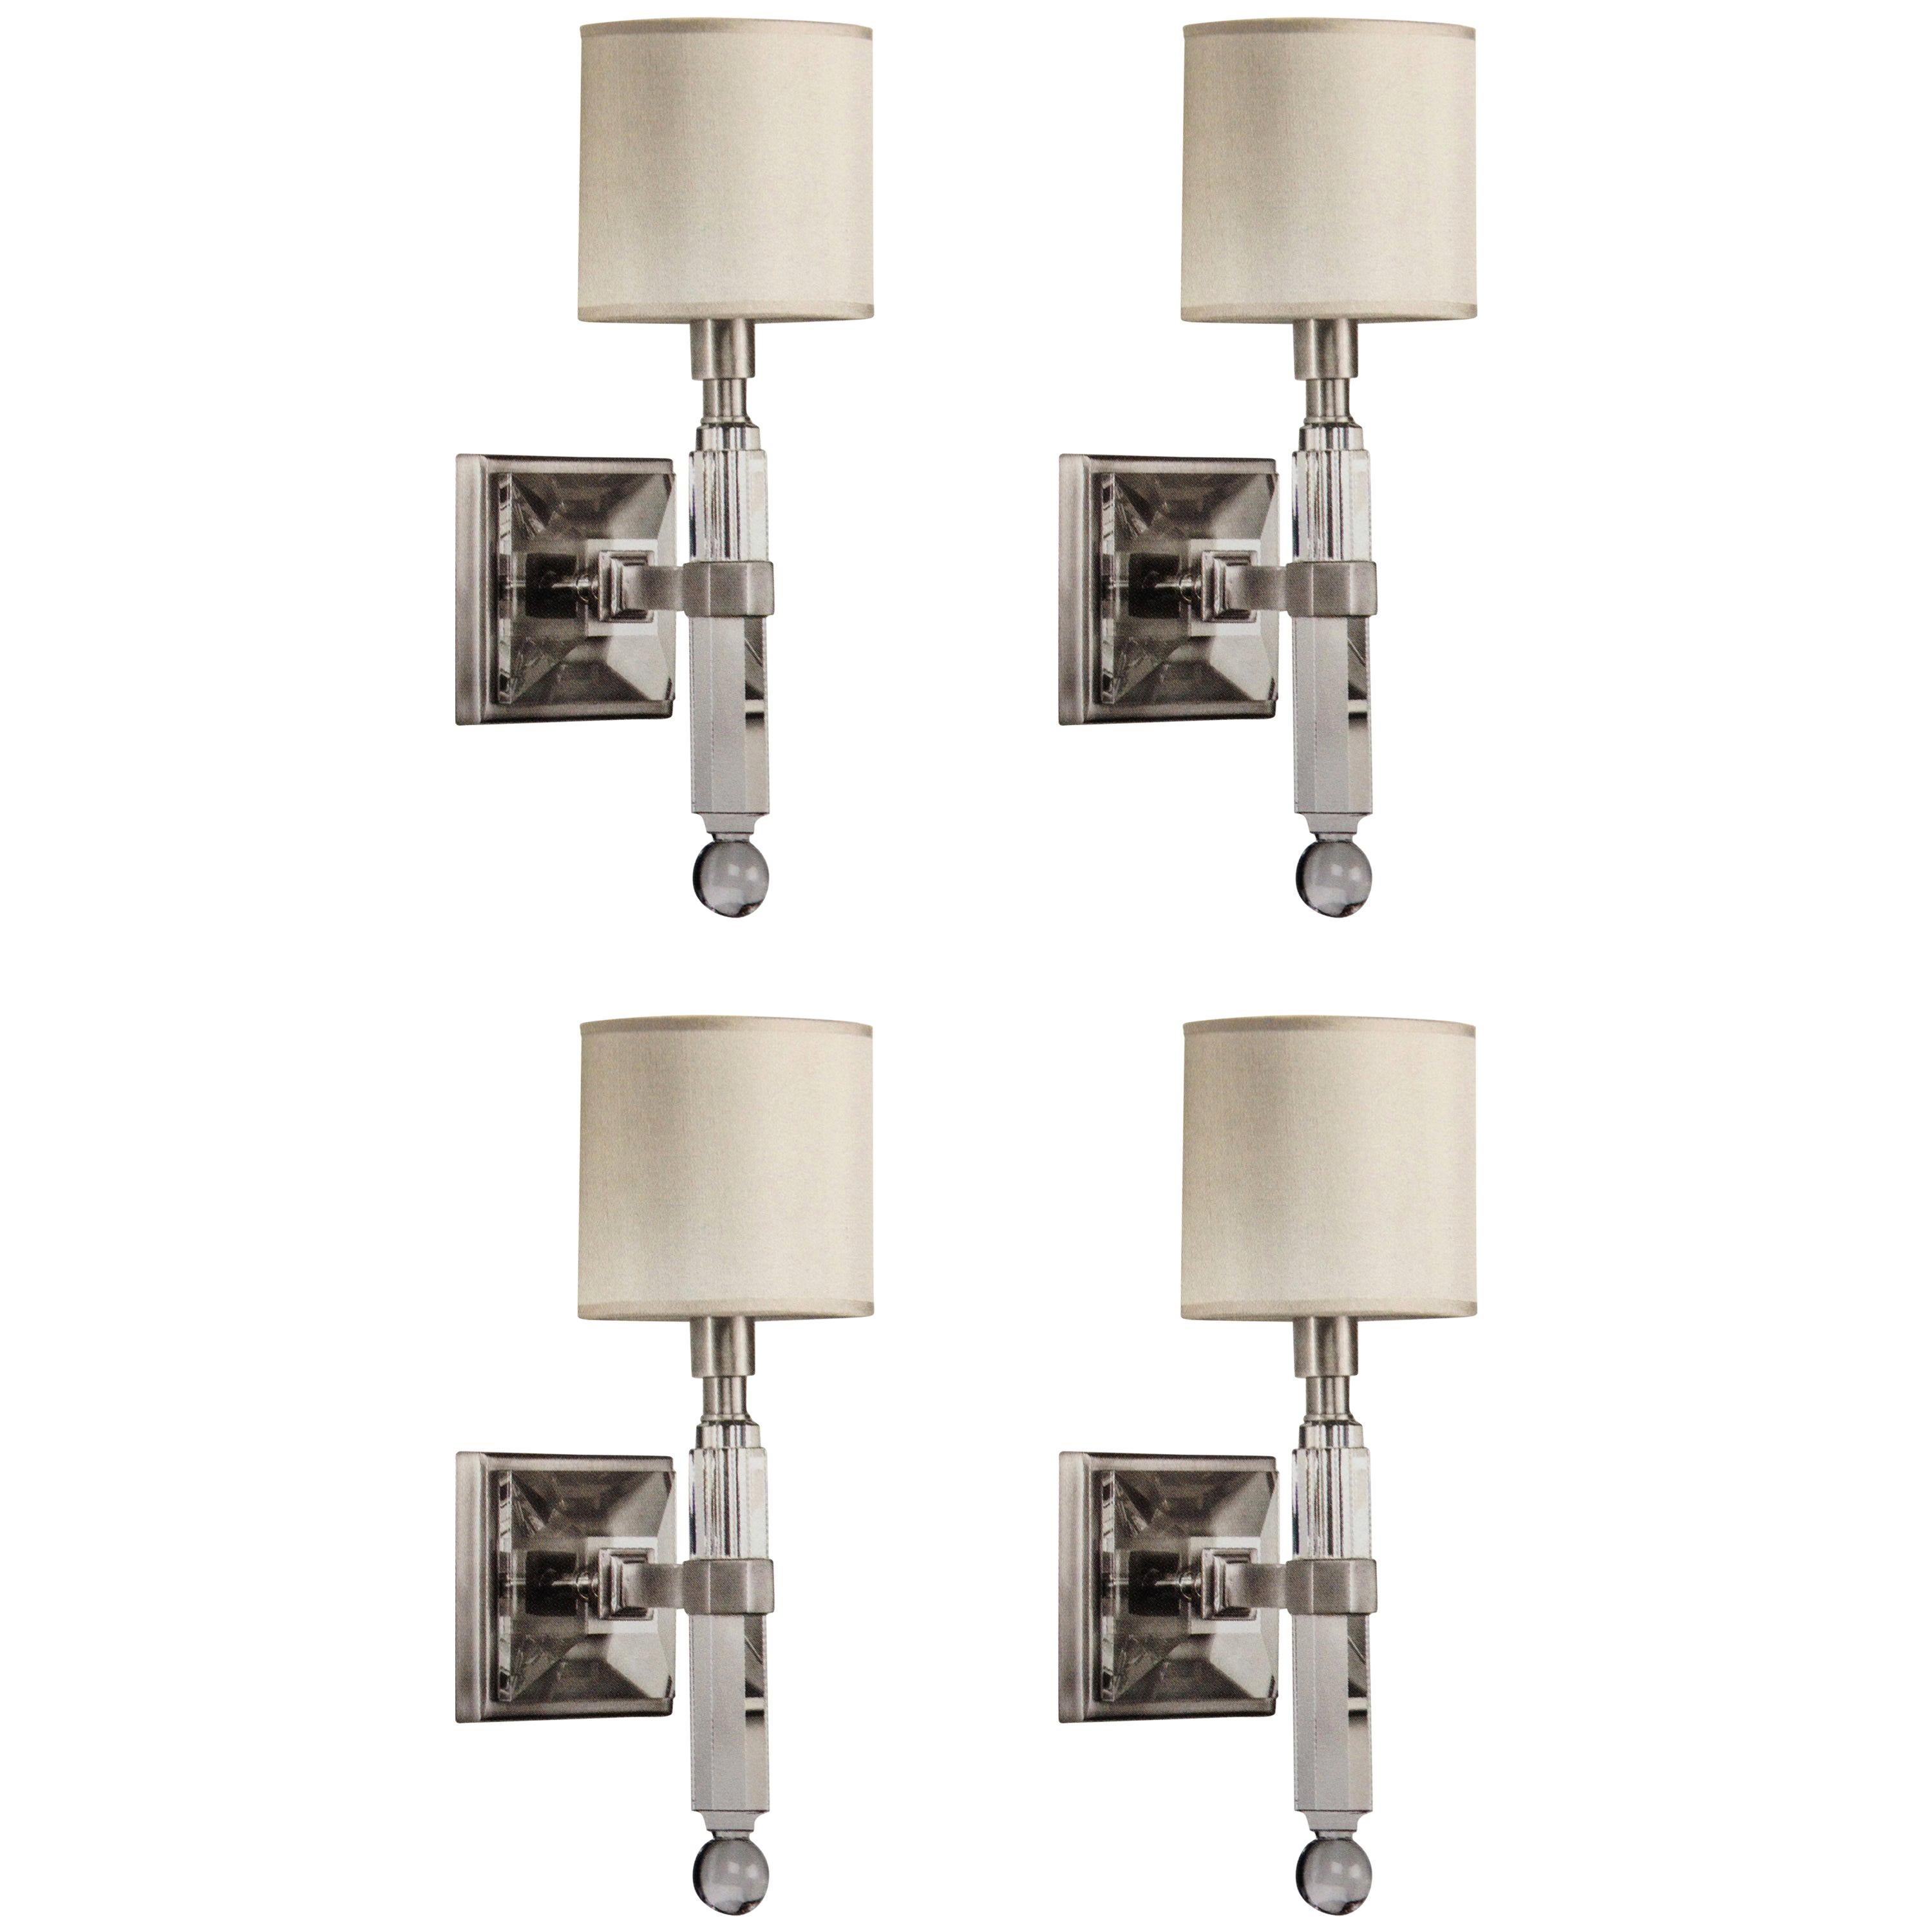 Four French Modern Neoclassical Style Wall Lights in Nickel and Crystal